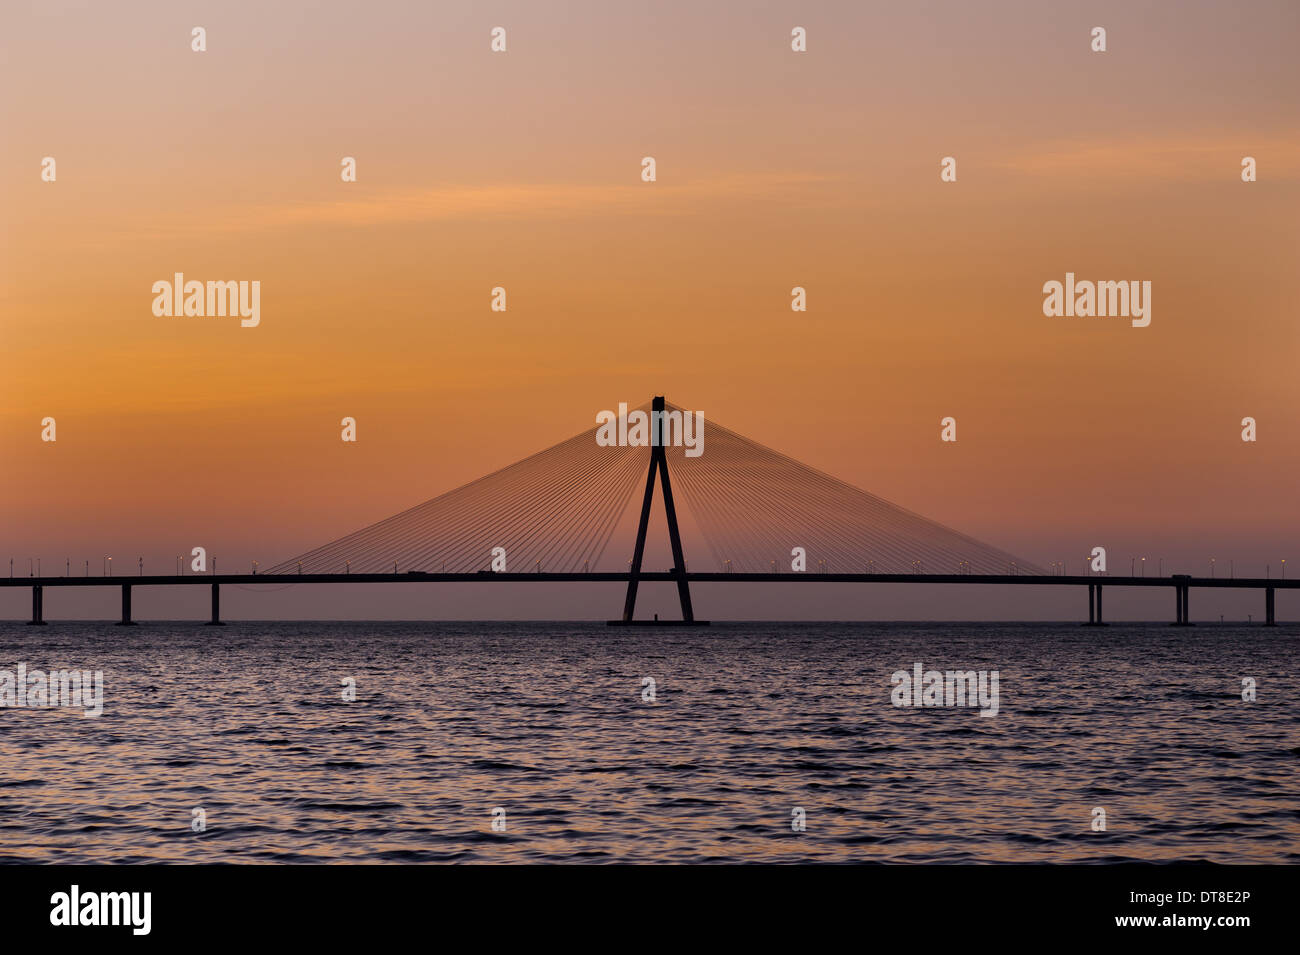 Evening sunset view of the main span of Bandra Worli Sea Link bridge. A testament to India's technological development. Stock Photo